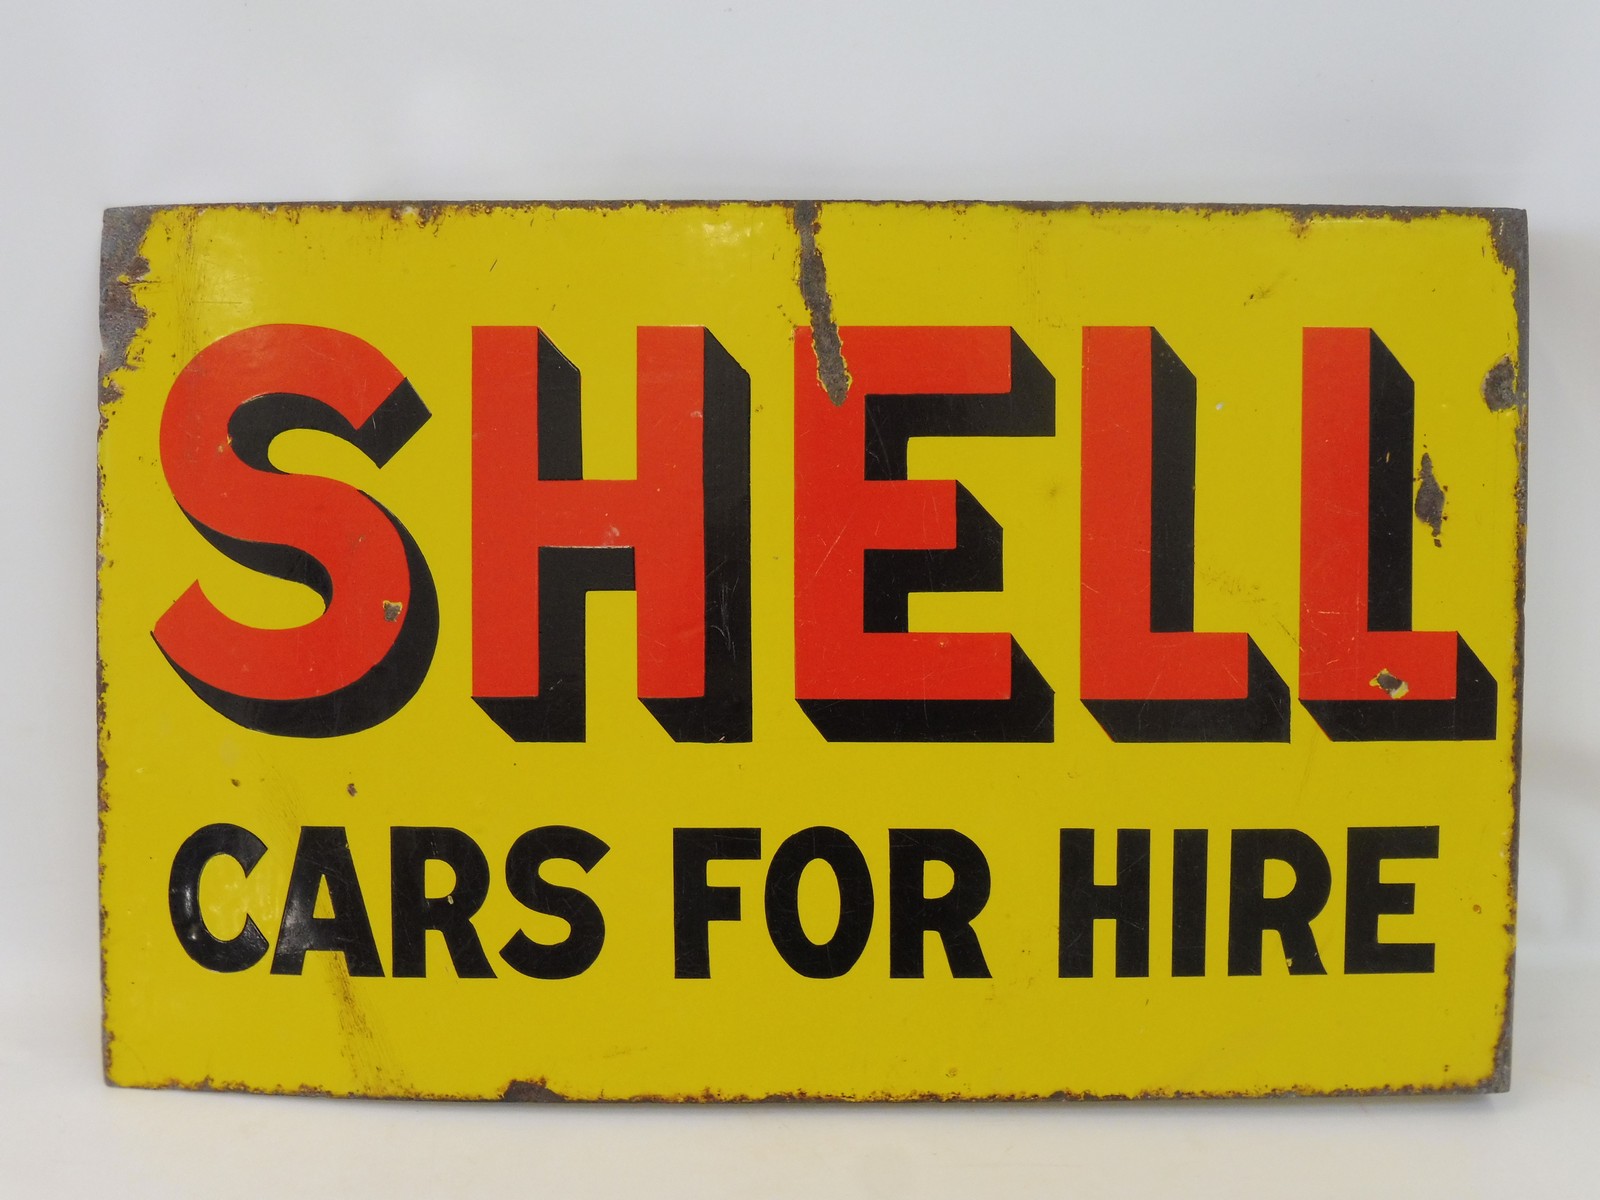 A Shell Cars for Hire double sided enamel sign with hanging flange, 24 x 15". - Image 2 of 2